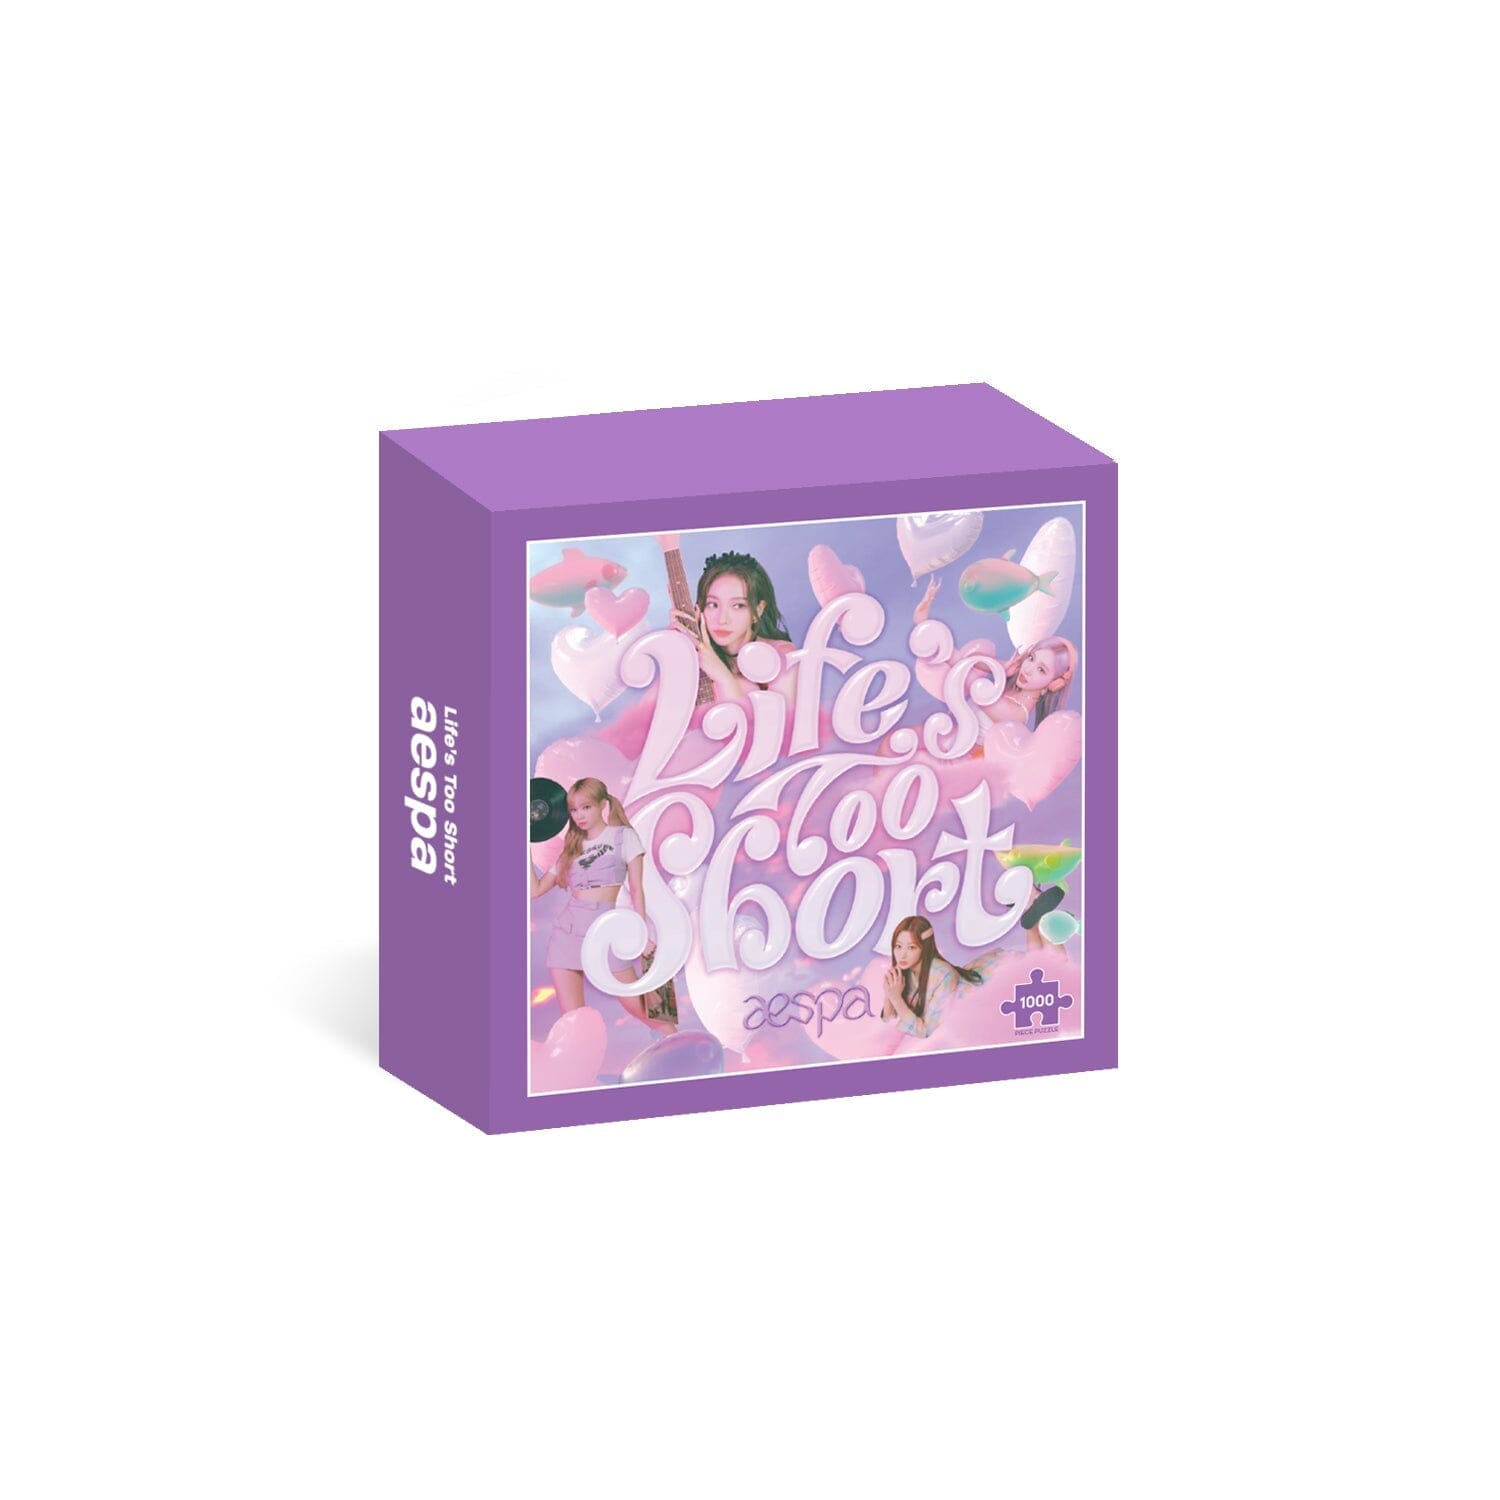 [SGS] aespa 'Life's Too Short' 1000pcs Puzzle + SGS Exclusive PhotoCard